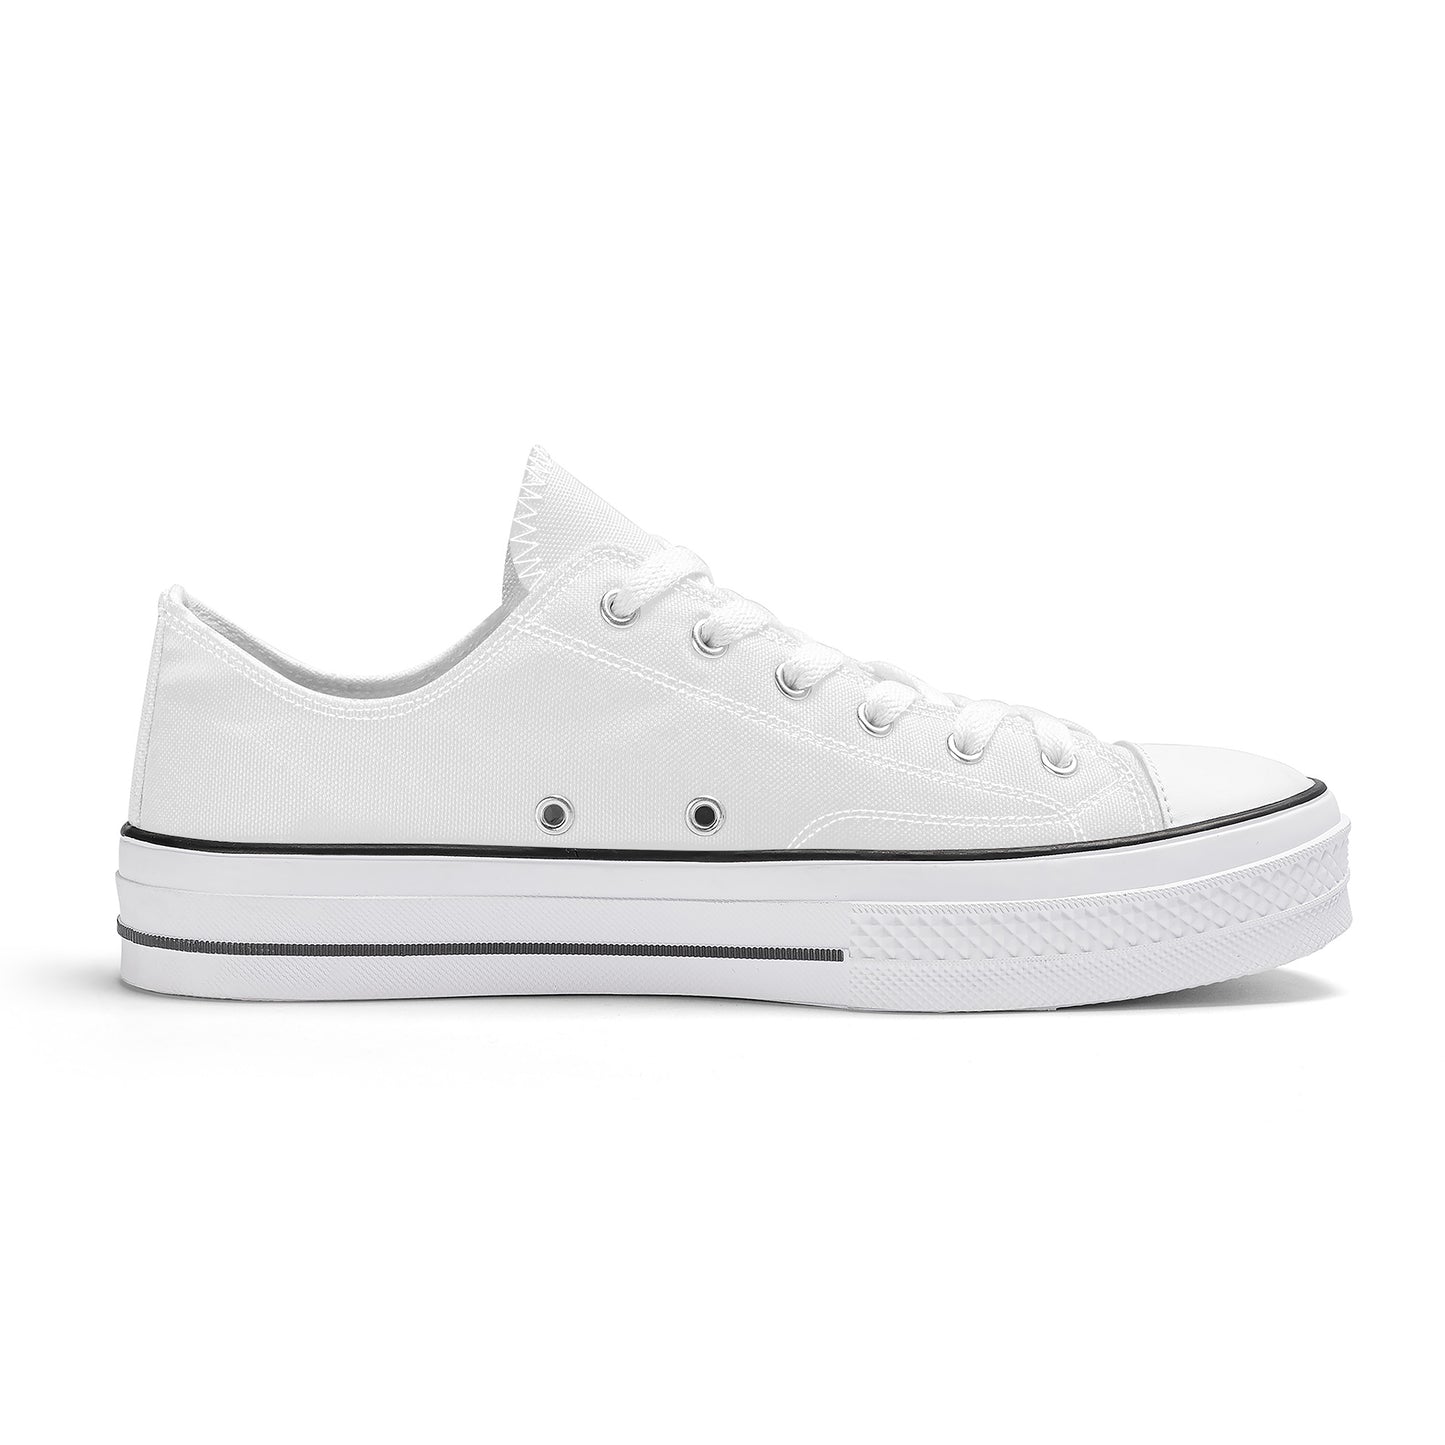 Create Your Own-Unisex Classic Low Top Canvas Shoes - White